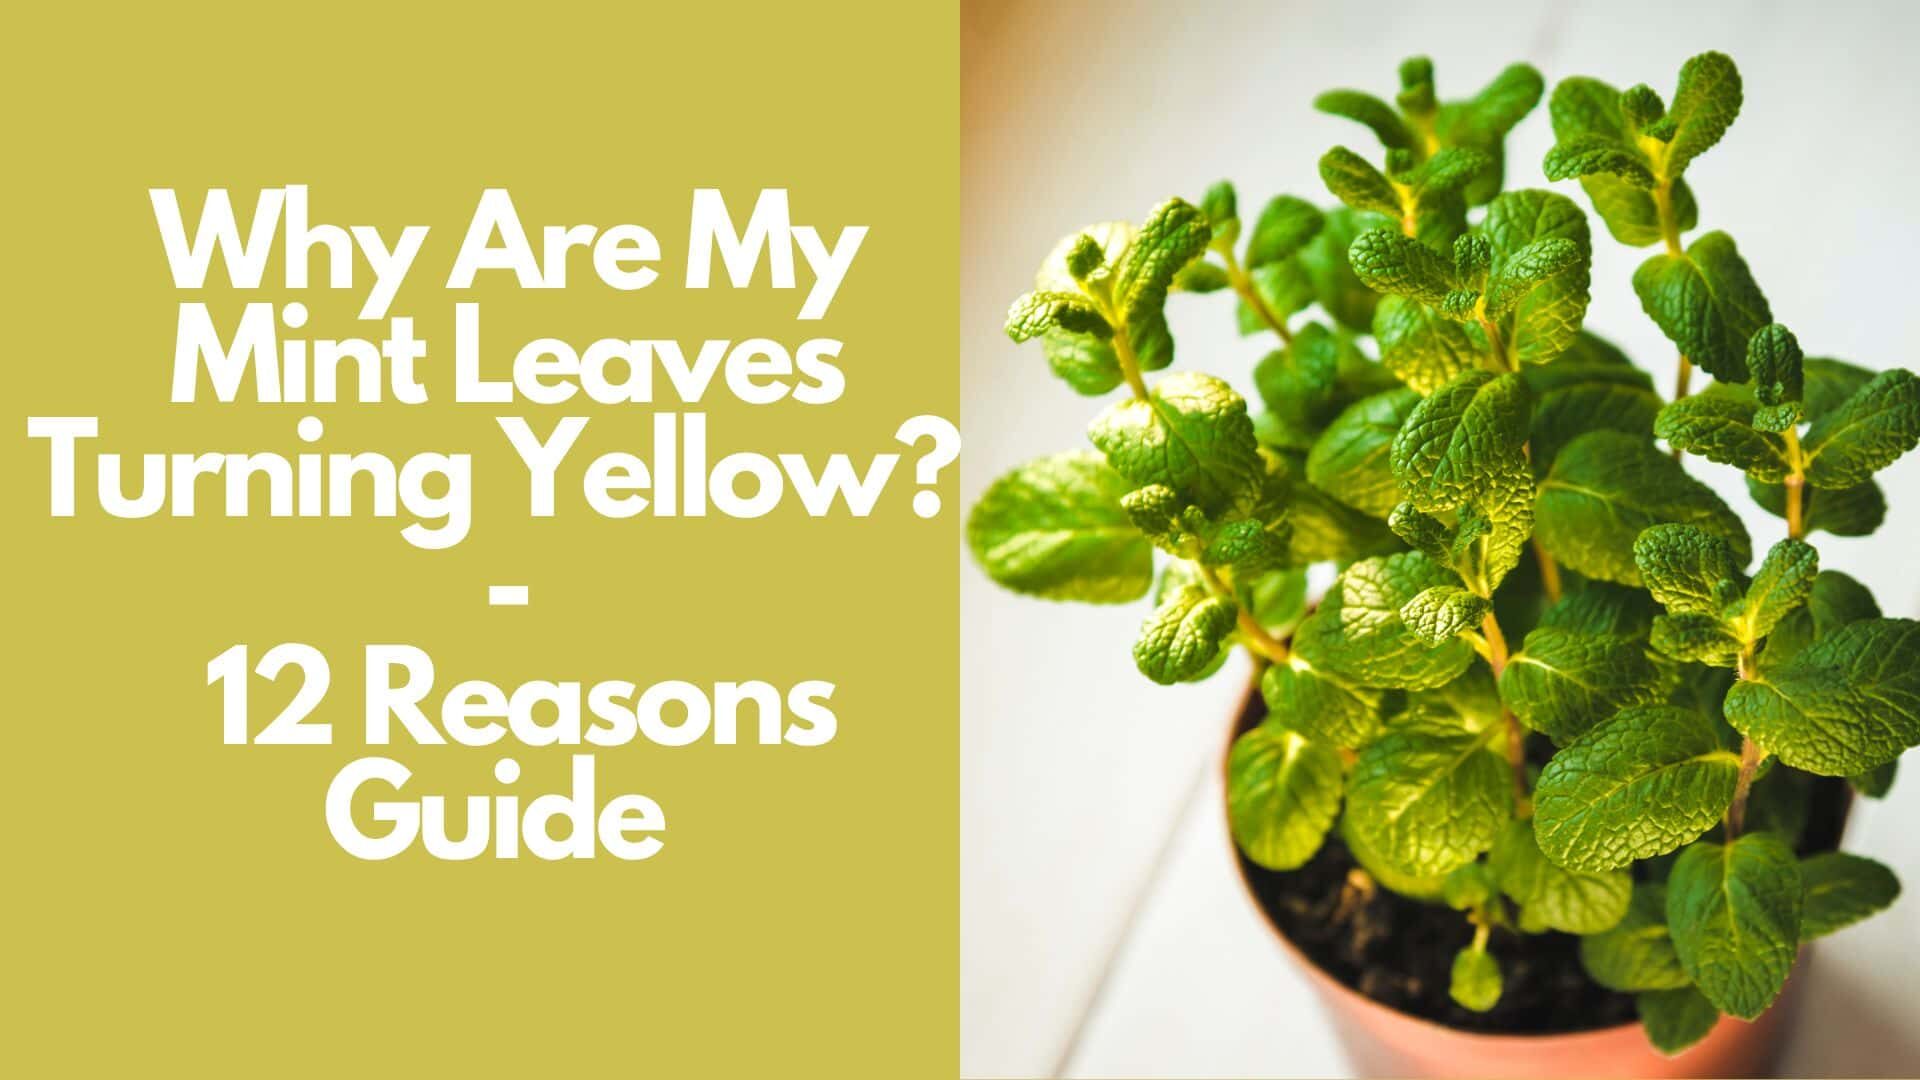 Why Are My Mint Leaves Turning Yellow? | 12 Reasons Guide